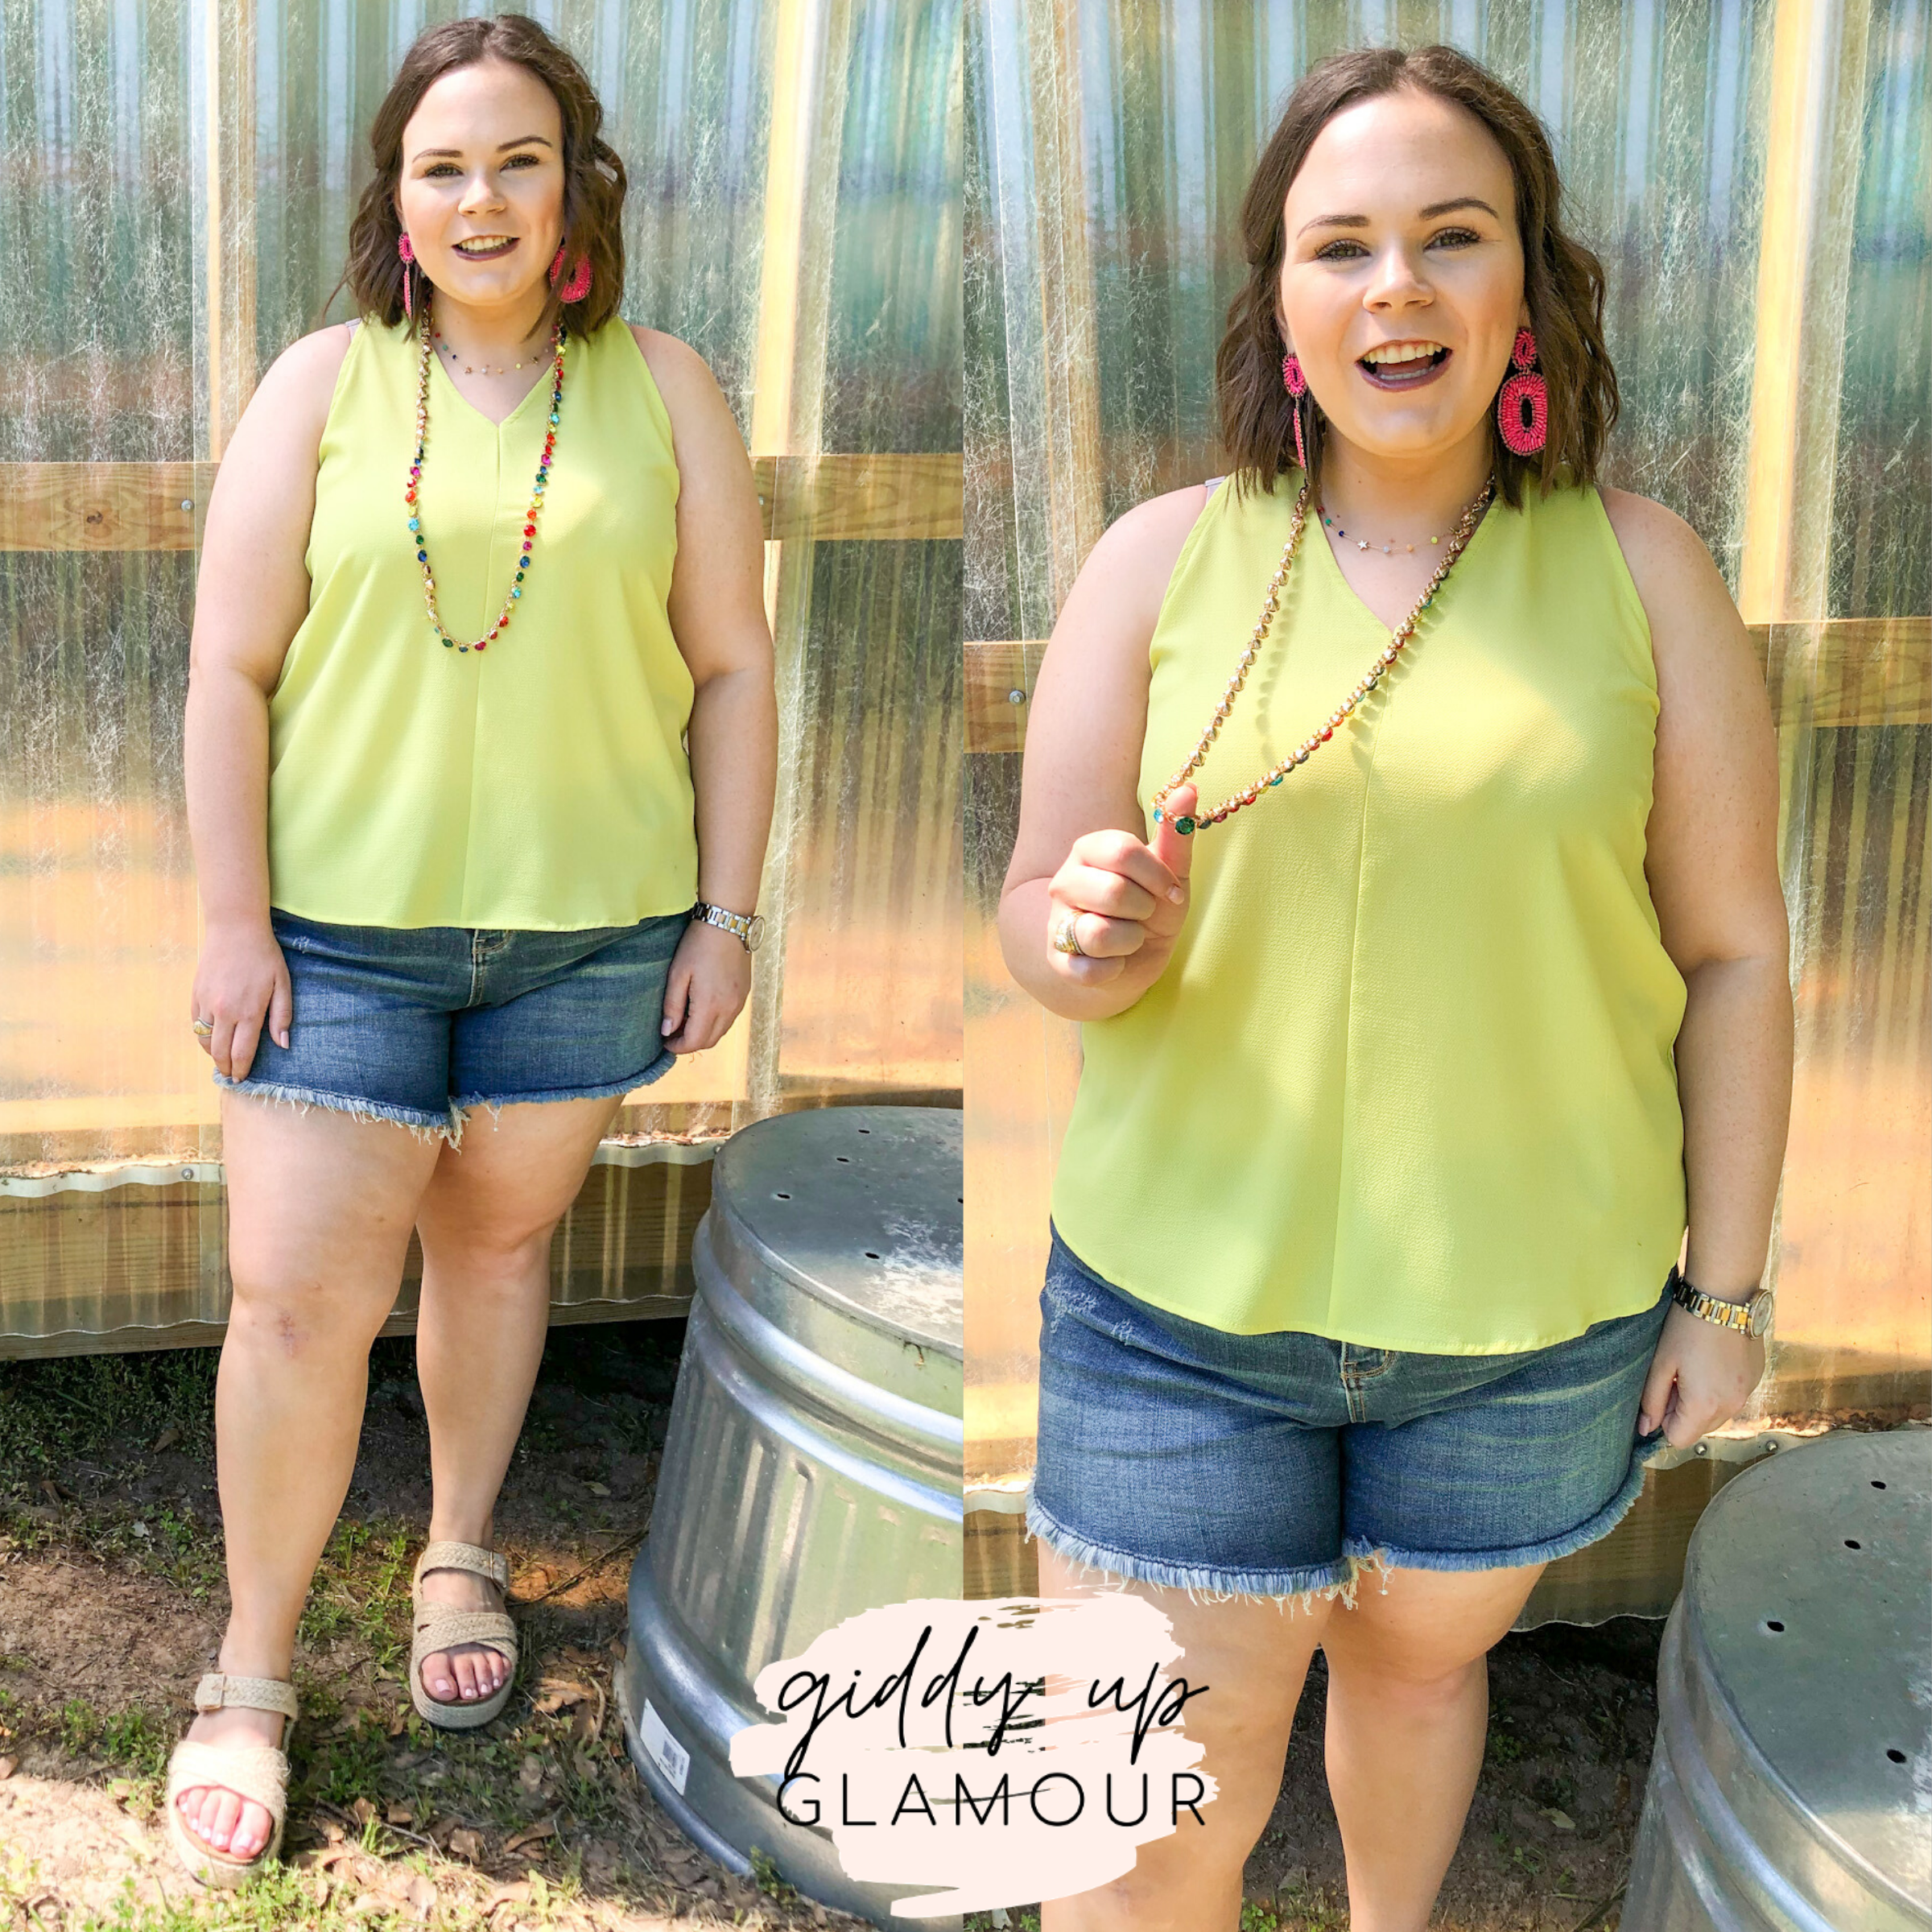 A Graceful Way V-Neck Tank Top with Ribbon in Lime Green - Giddy Up Glamour Boutique